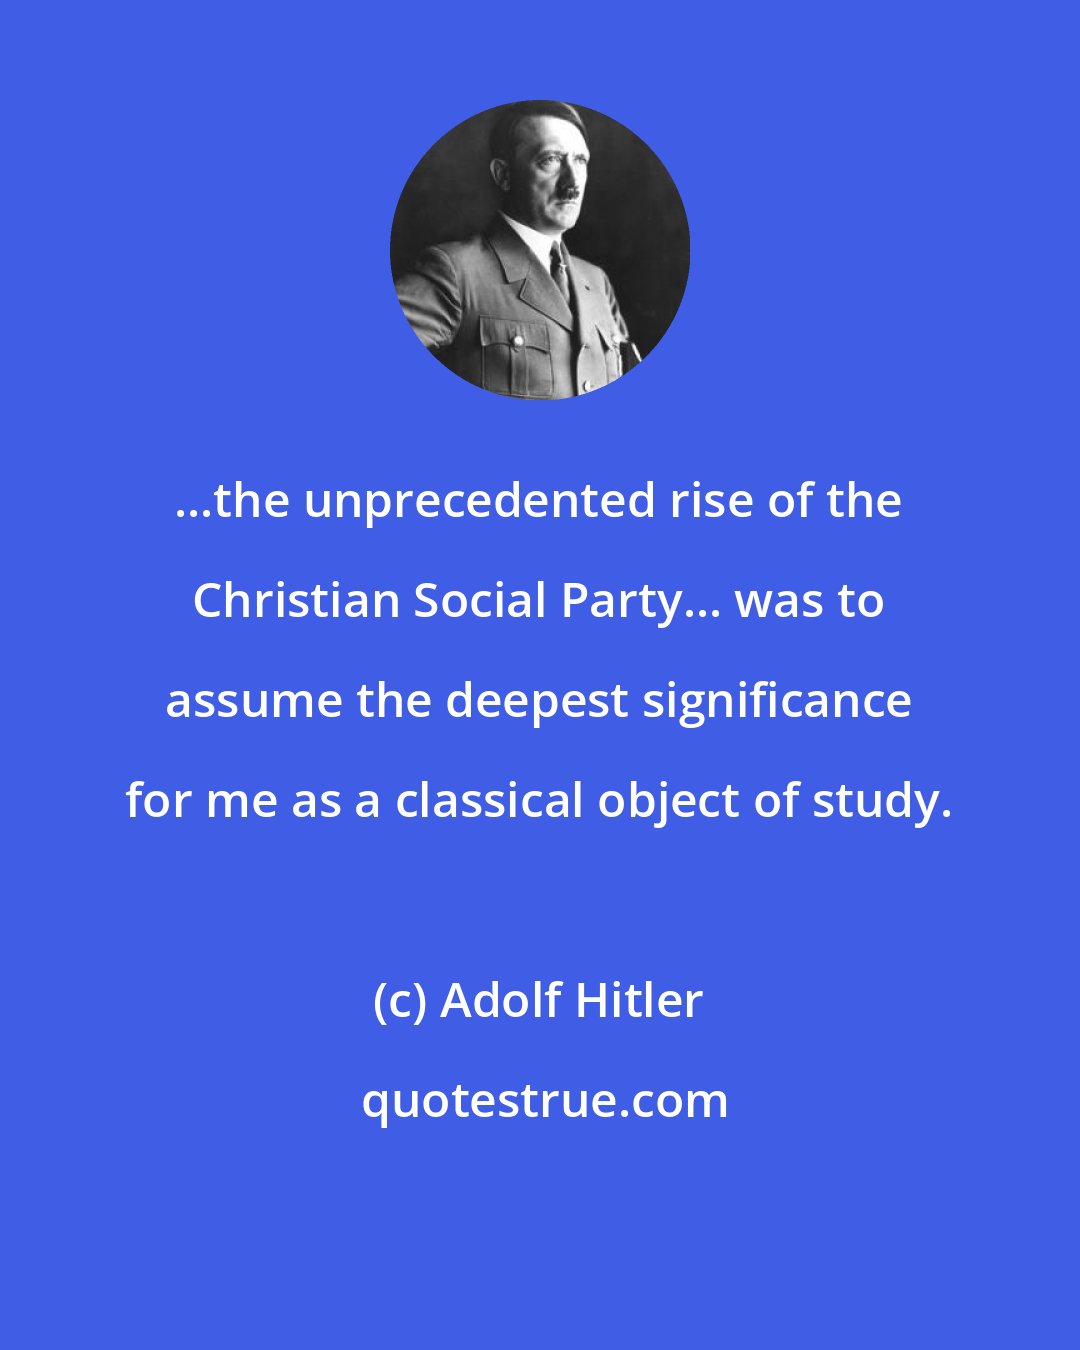 Adolf Hitler: ...the unprecedented rise of the Christian Social Party... was to assume the deepest significance for me as a classical object of study.